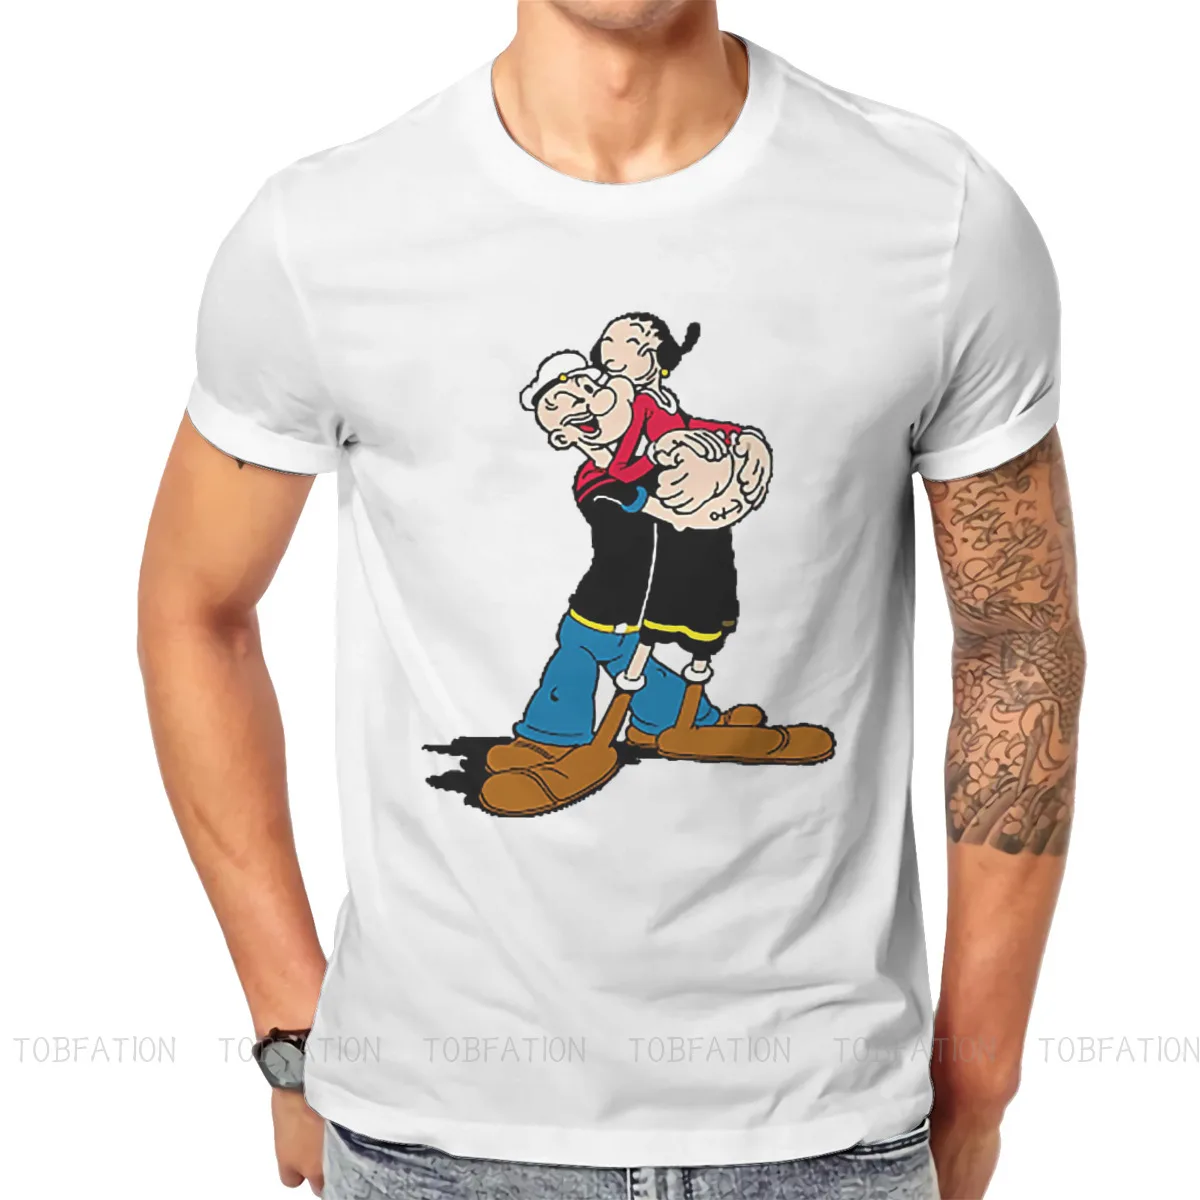 

Popeye The Sailor Spinach Cartoon TShirt for Men Love Olive Basic Casual Sweatshirts T Shirt Novelty New Design Loose